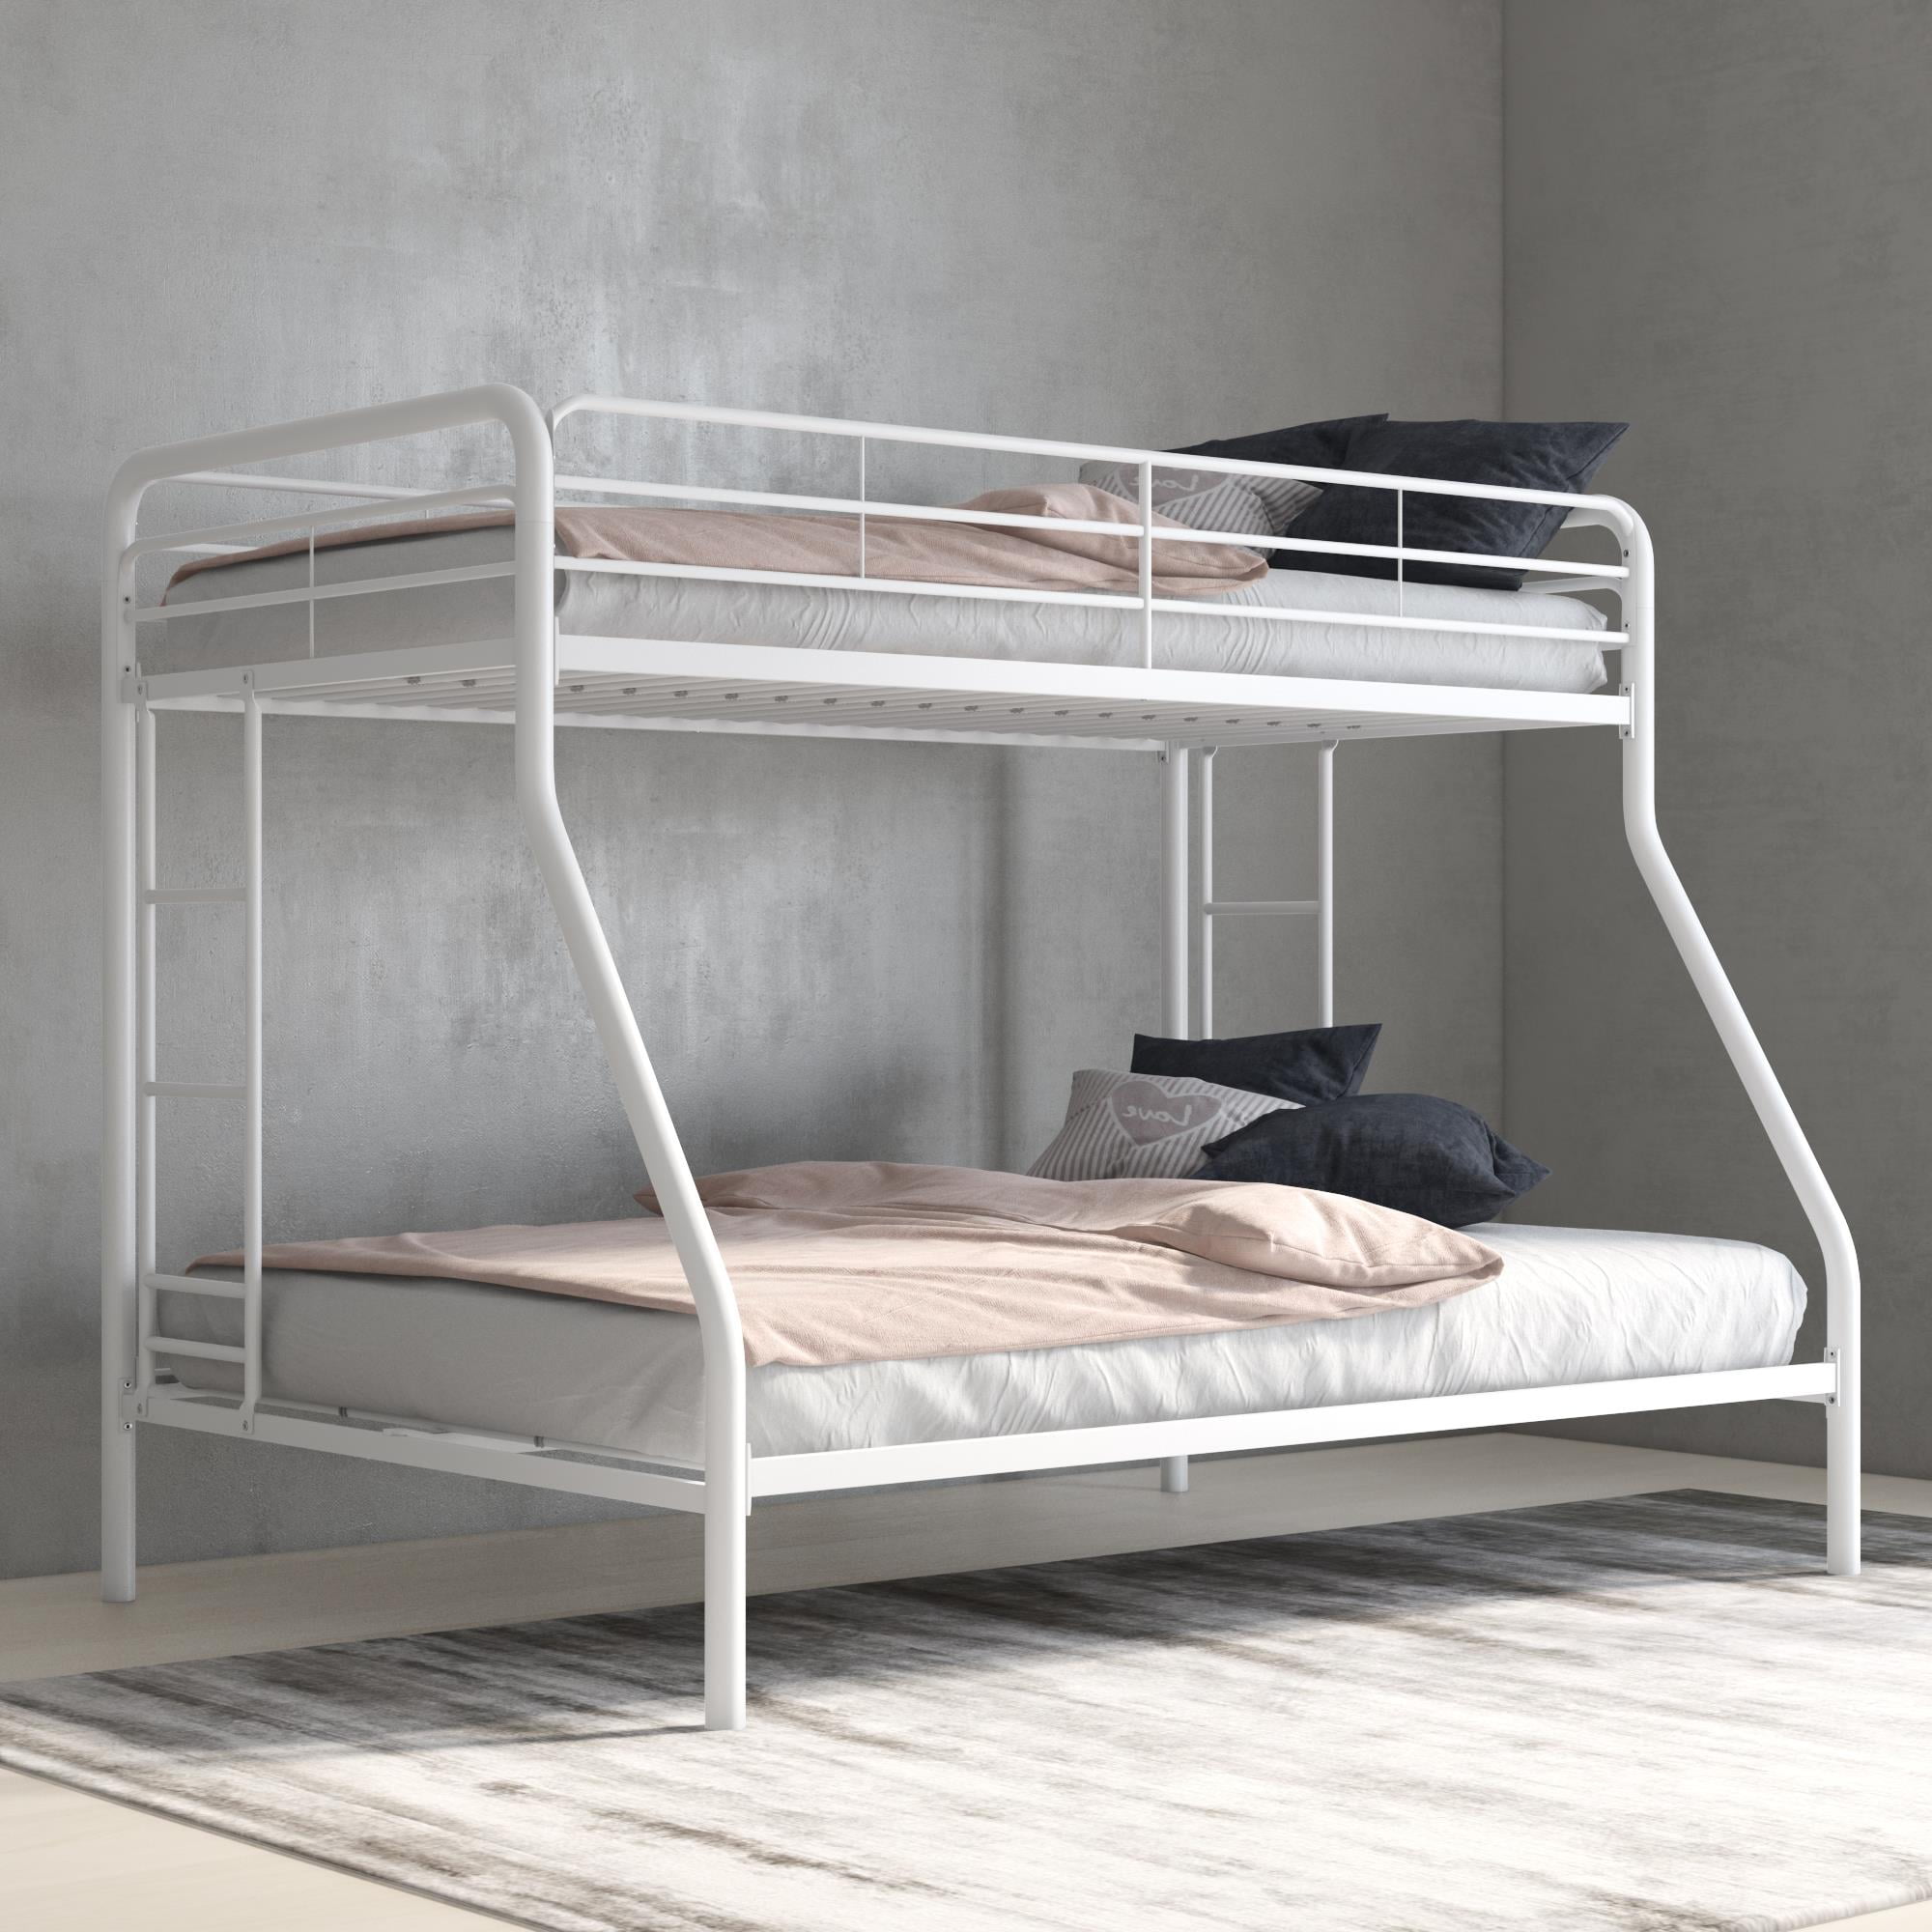 Mainstays Small Space Junior Twin Over, Mainstays Twin Convertible Metal Bunk Bed Assembly Instructions